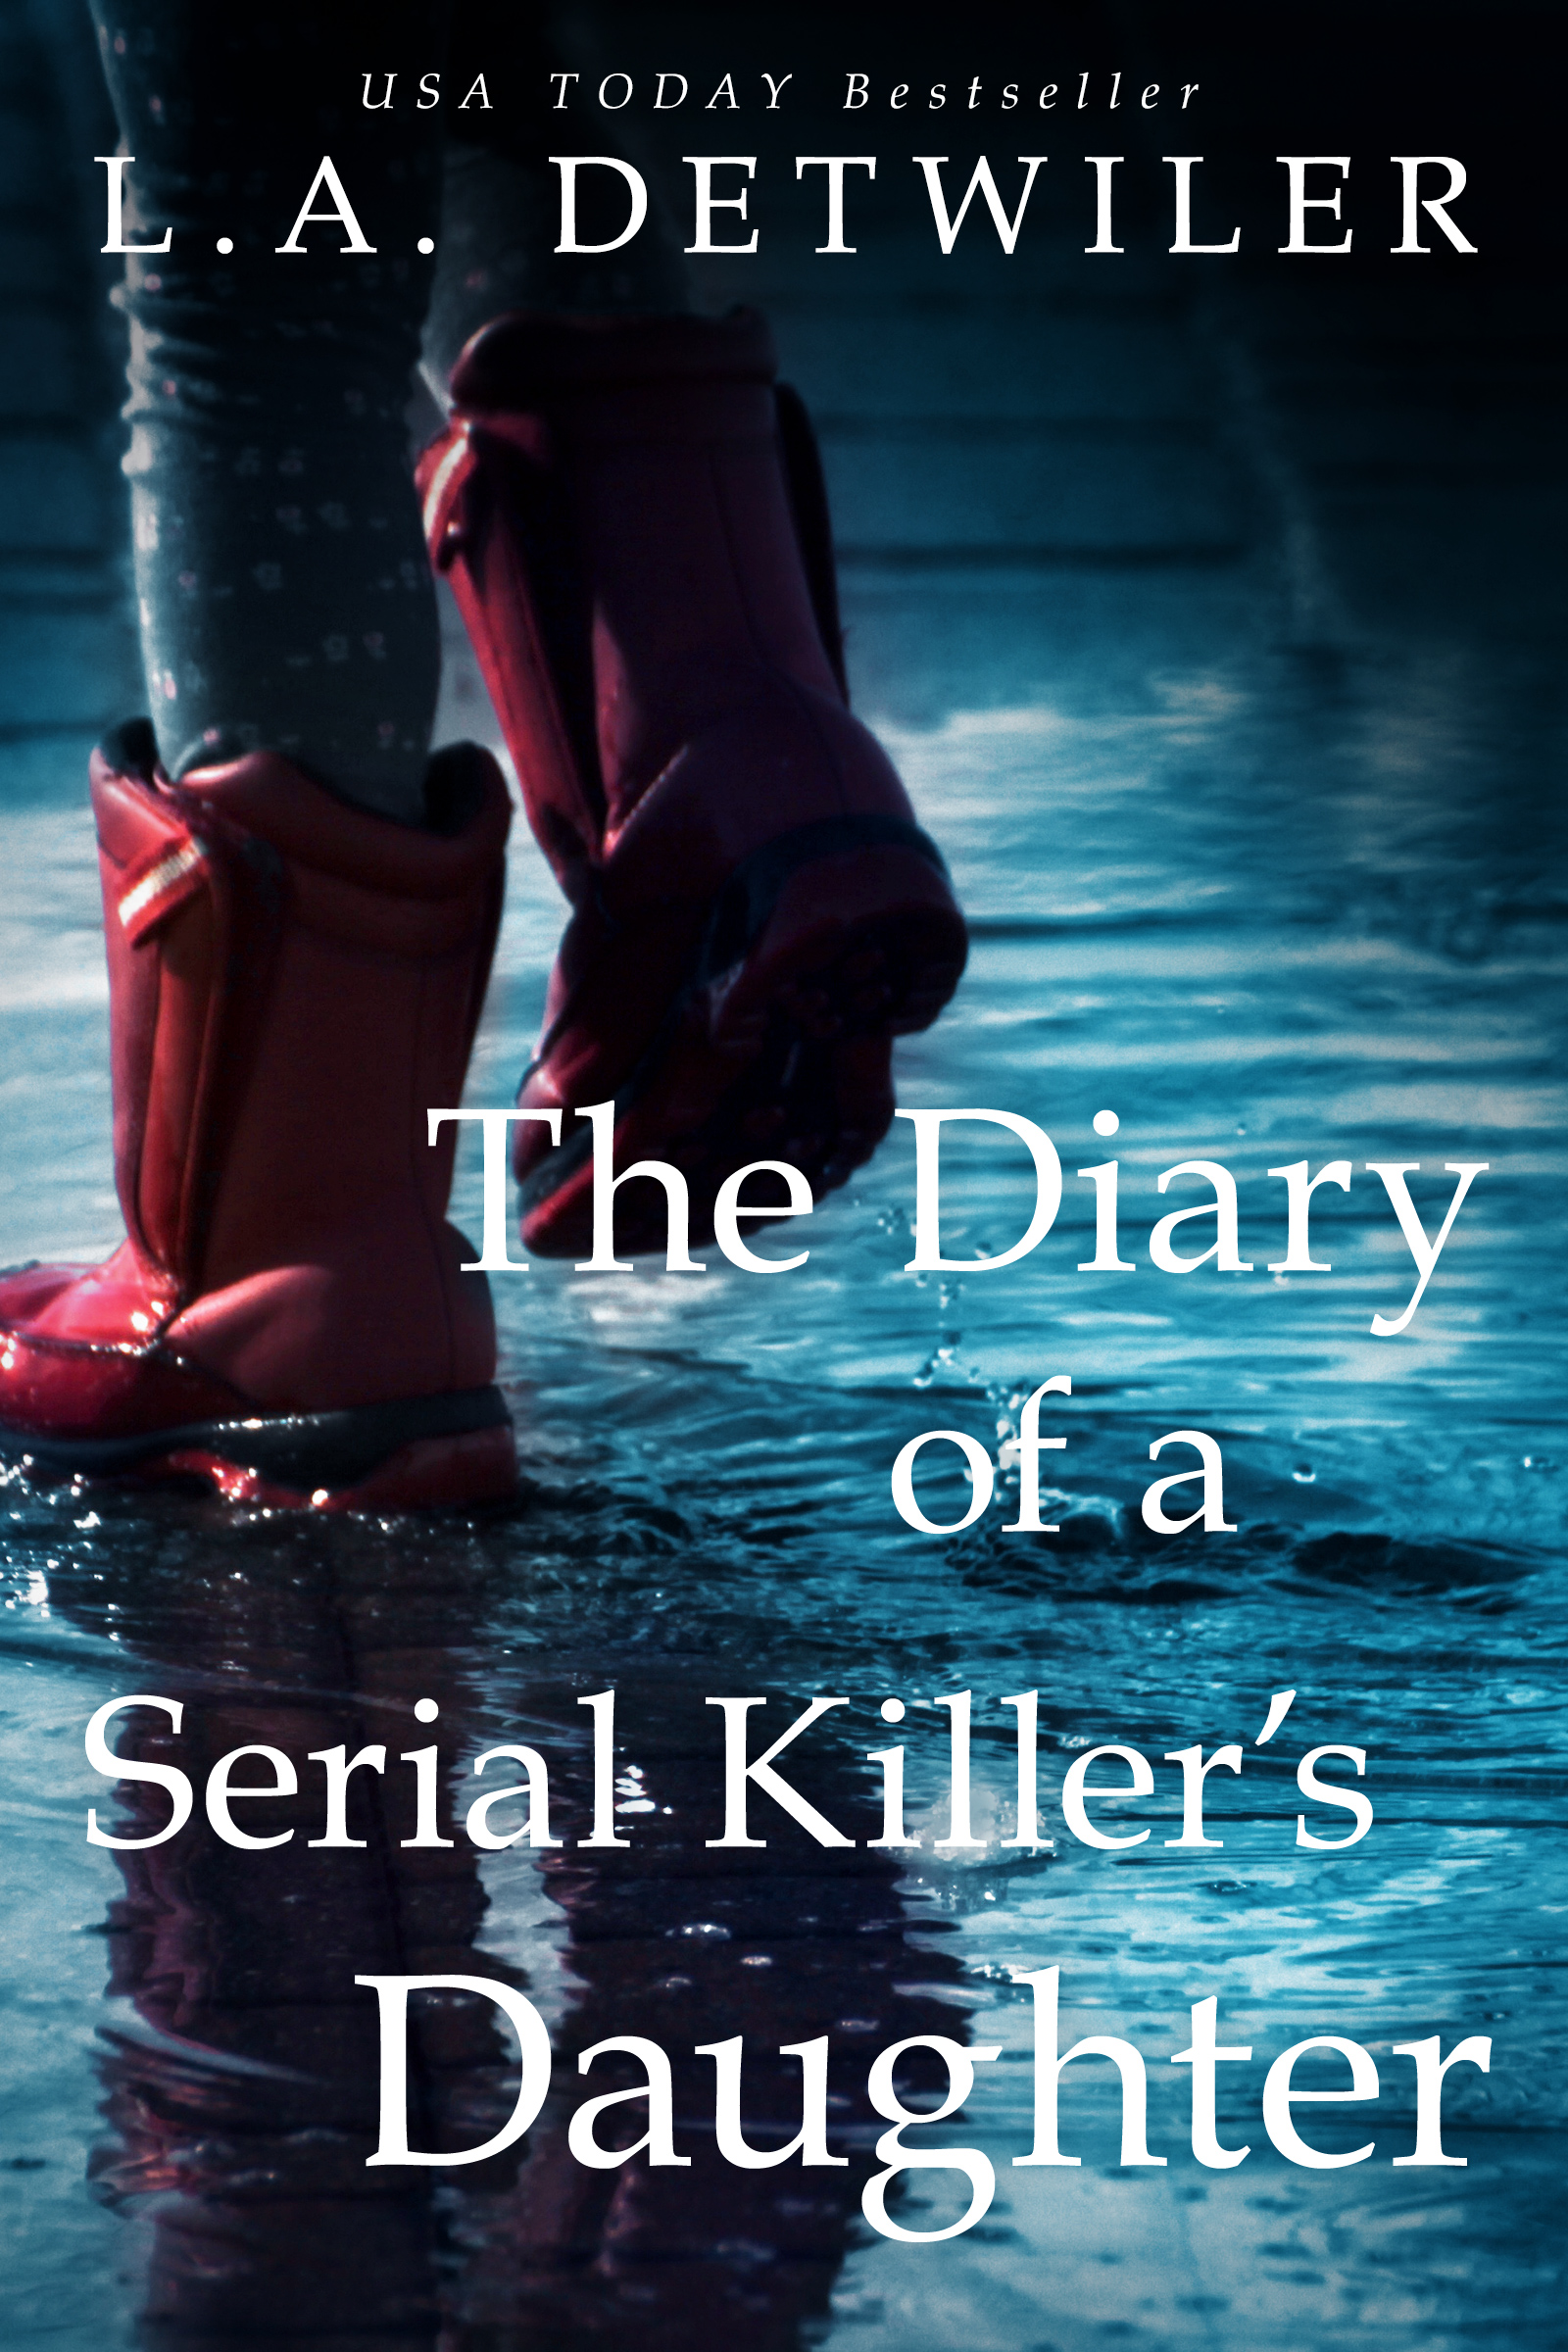 FREE: The Diary of a Serial Killer’s Daughter by L.A. Detwiler